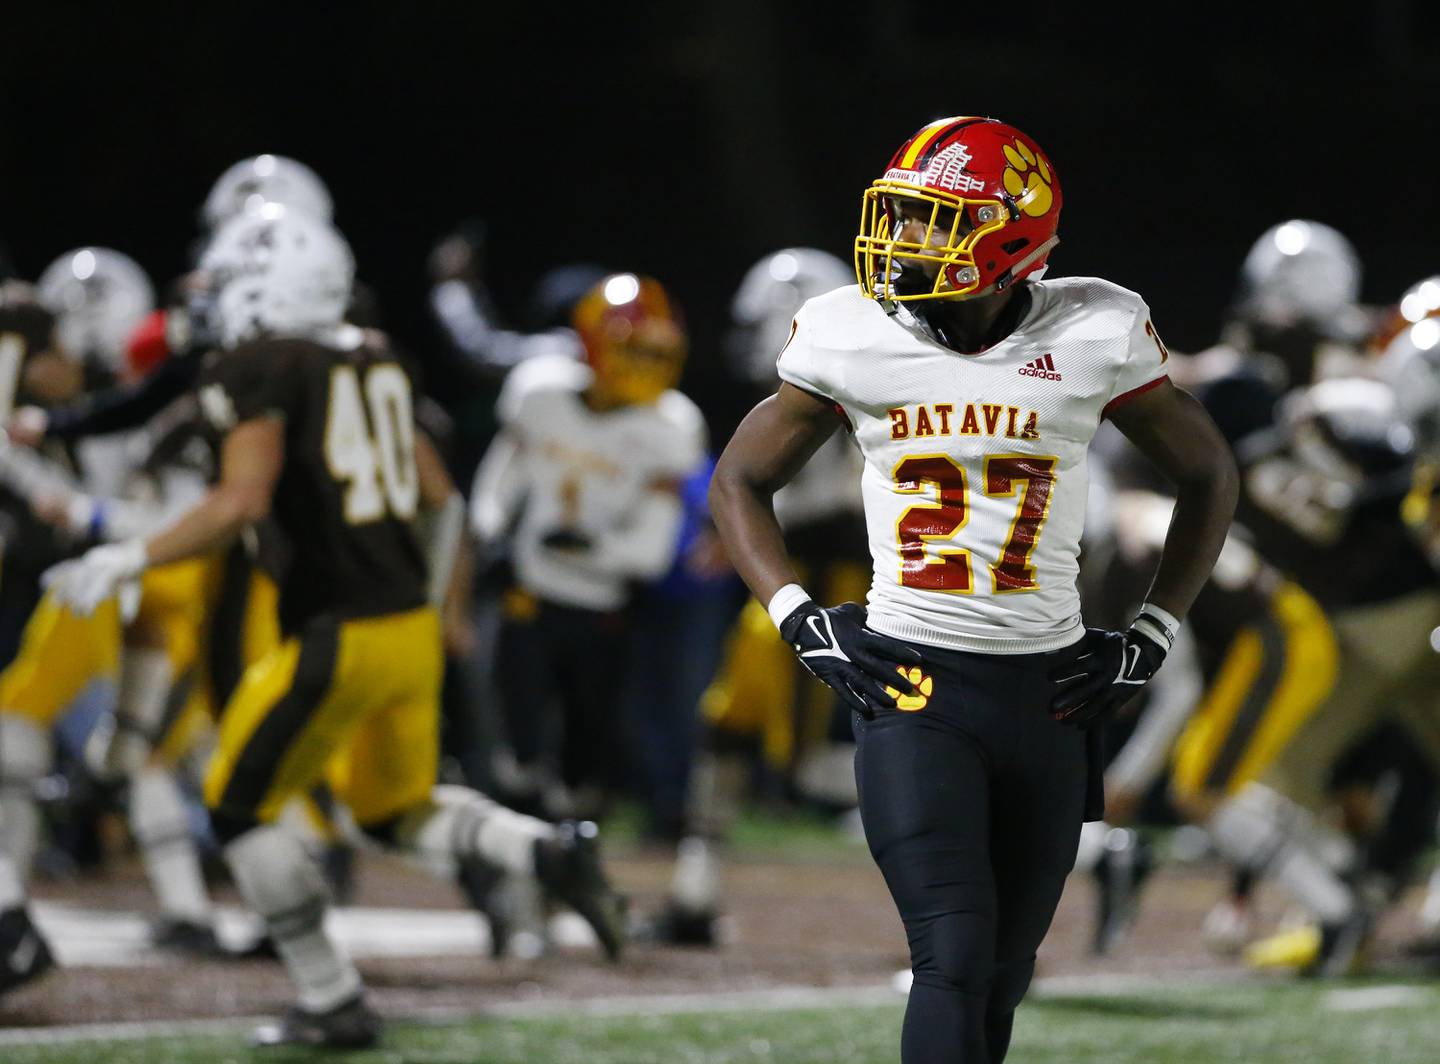 Batavia's Jalen Buckley looks on as fans rush the field as Mt. Carmel wins on a last second touchdown during the IHSA Class 7A varsity football playoff game between Batavia and Mt. Carmel on Friday, November 5, 2021 in Chicago.